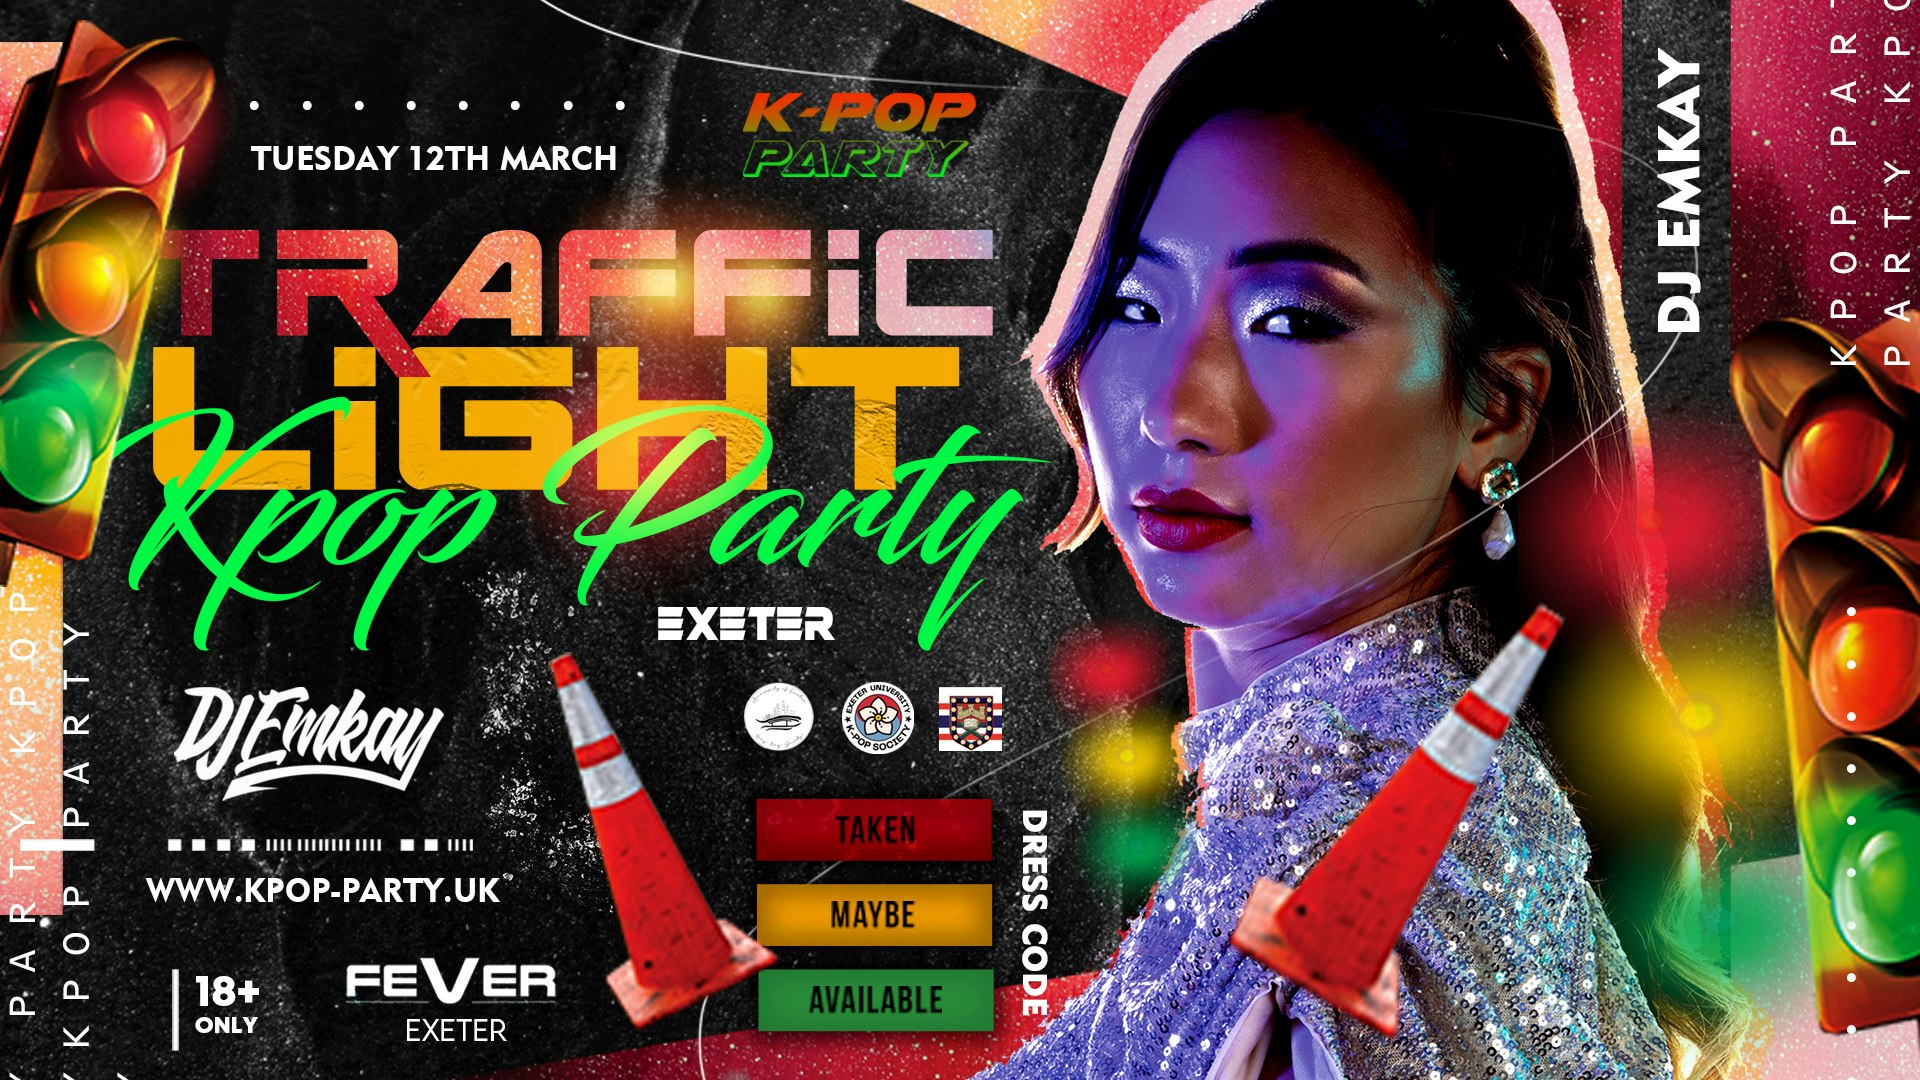 K-Pop TRAFFIC LIGHT Party Exeter with DJ EMKAY – Tuesday 12th March